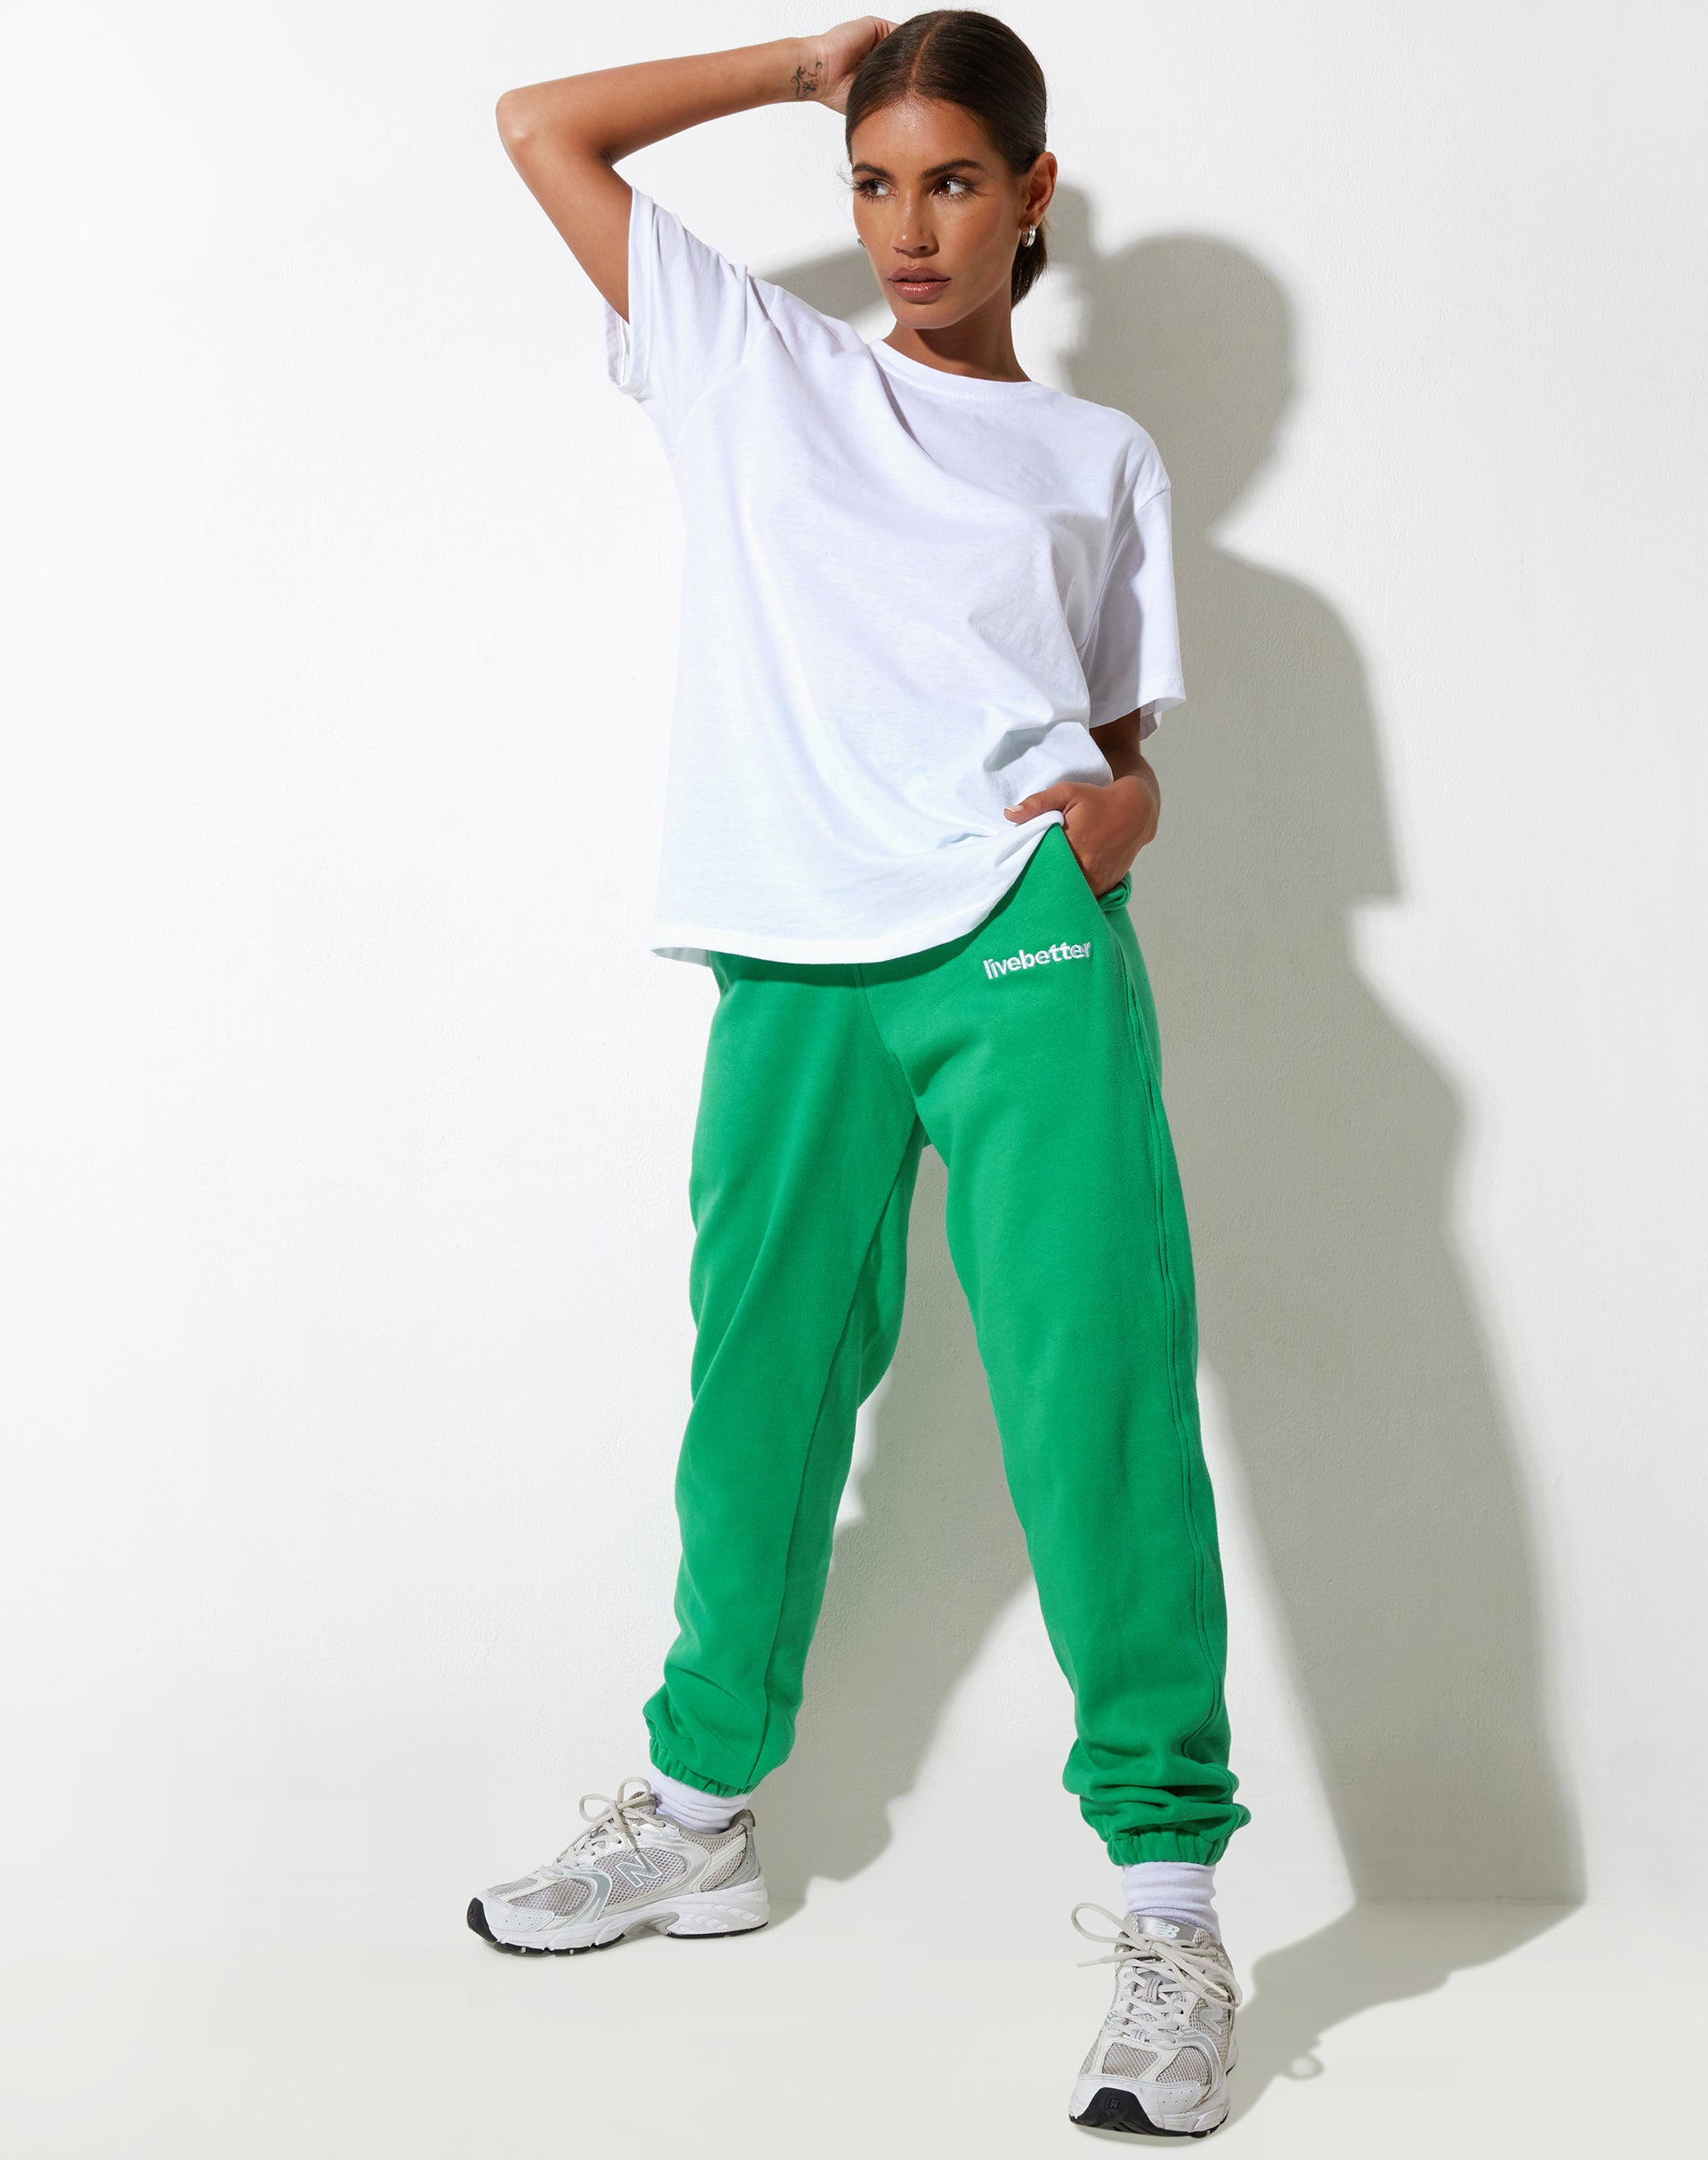 image of Basta Jogger in Fun Green with "Live Better" Embro